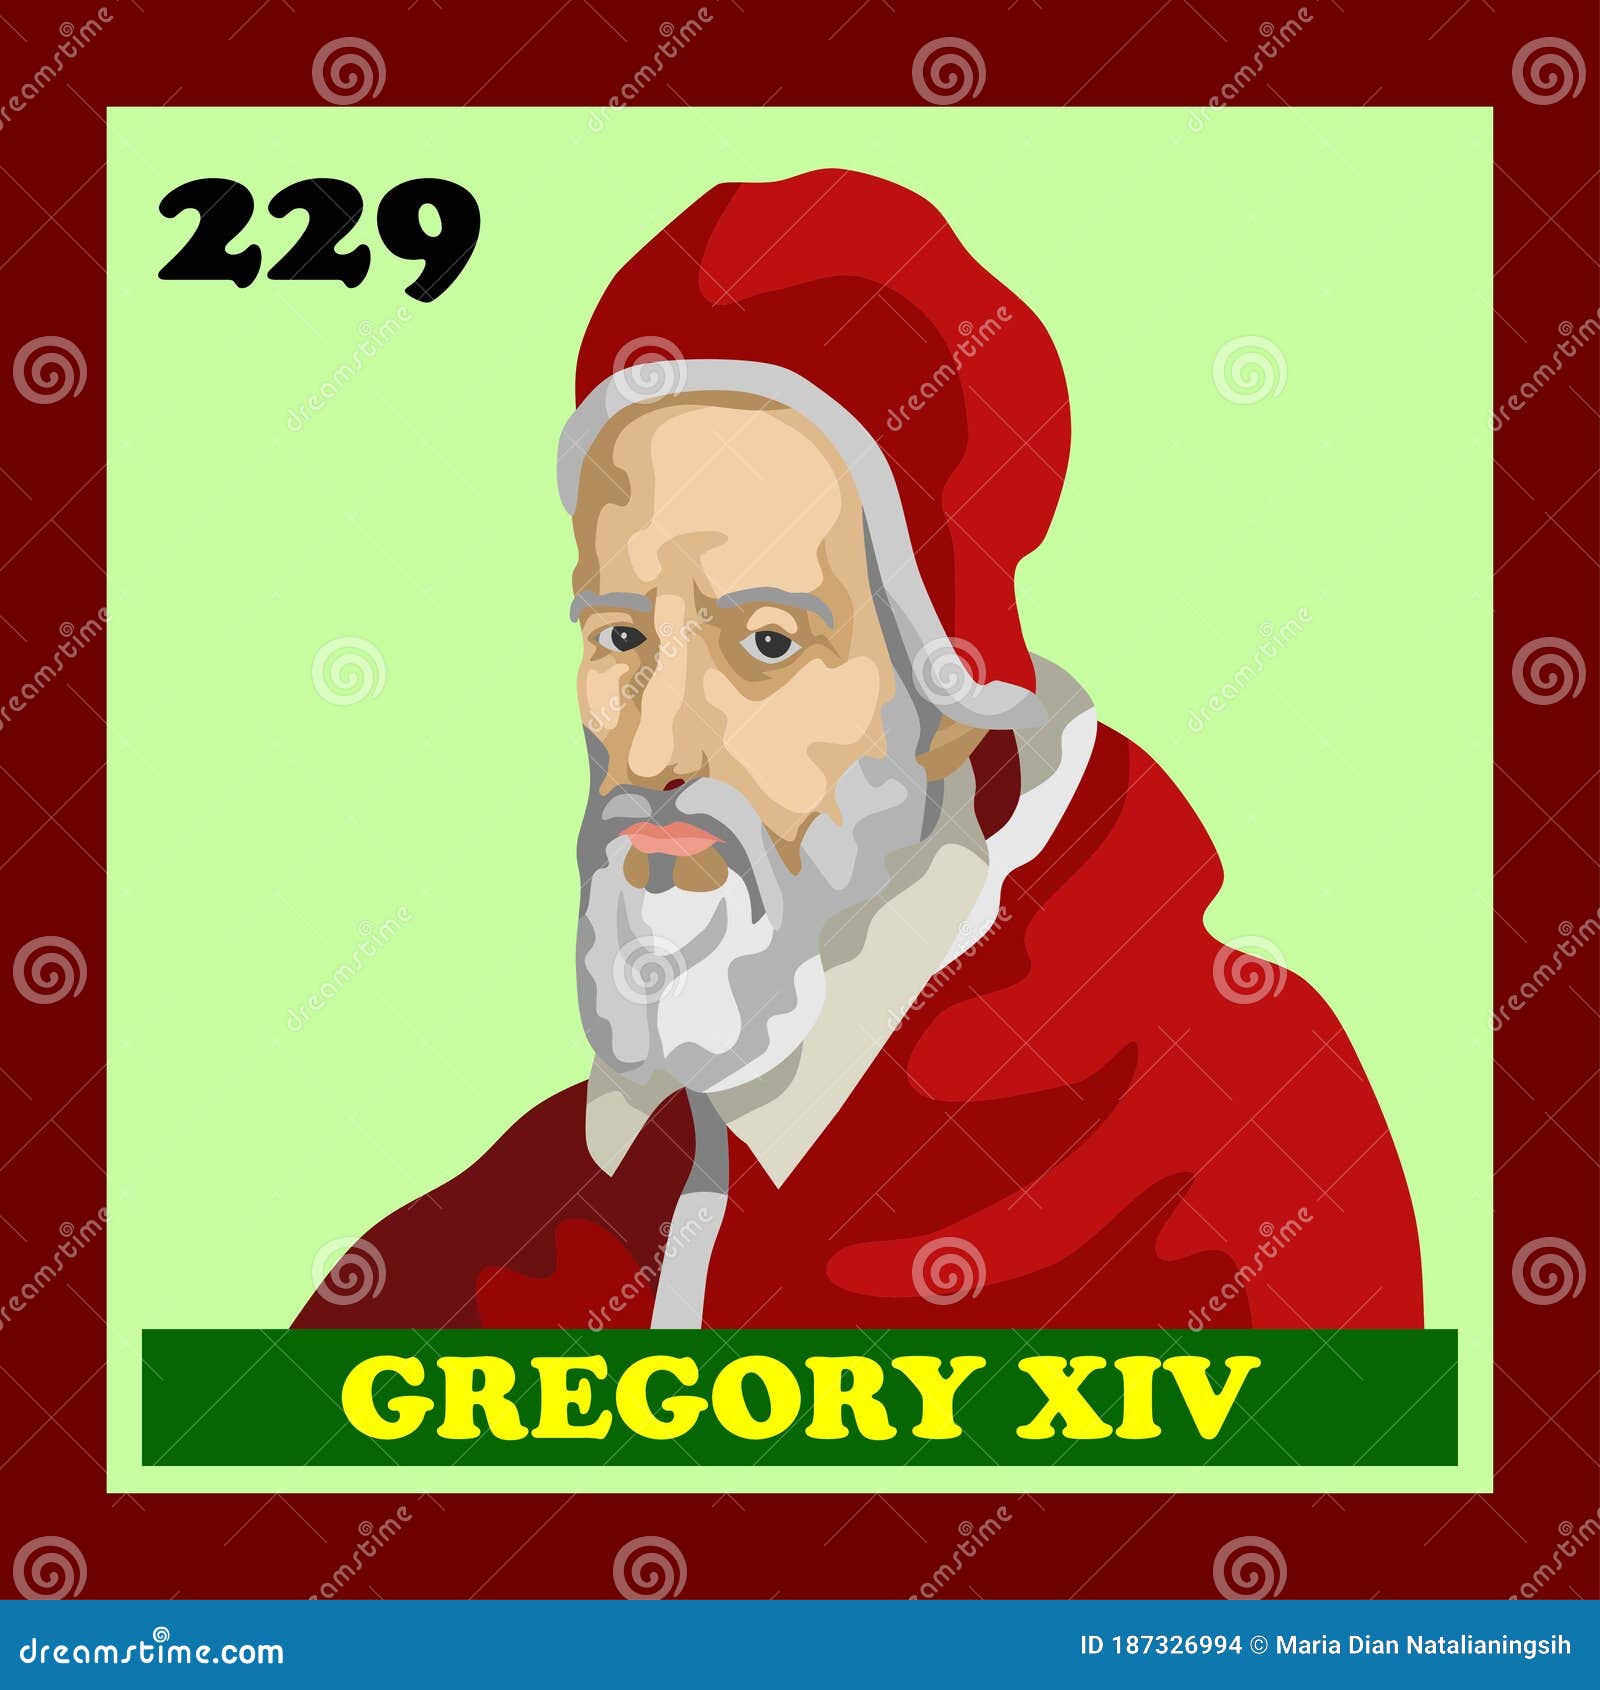 229th rome pope gregory xiv